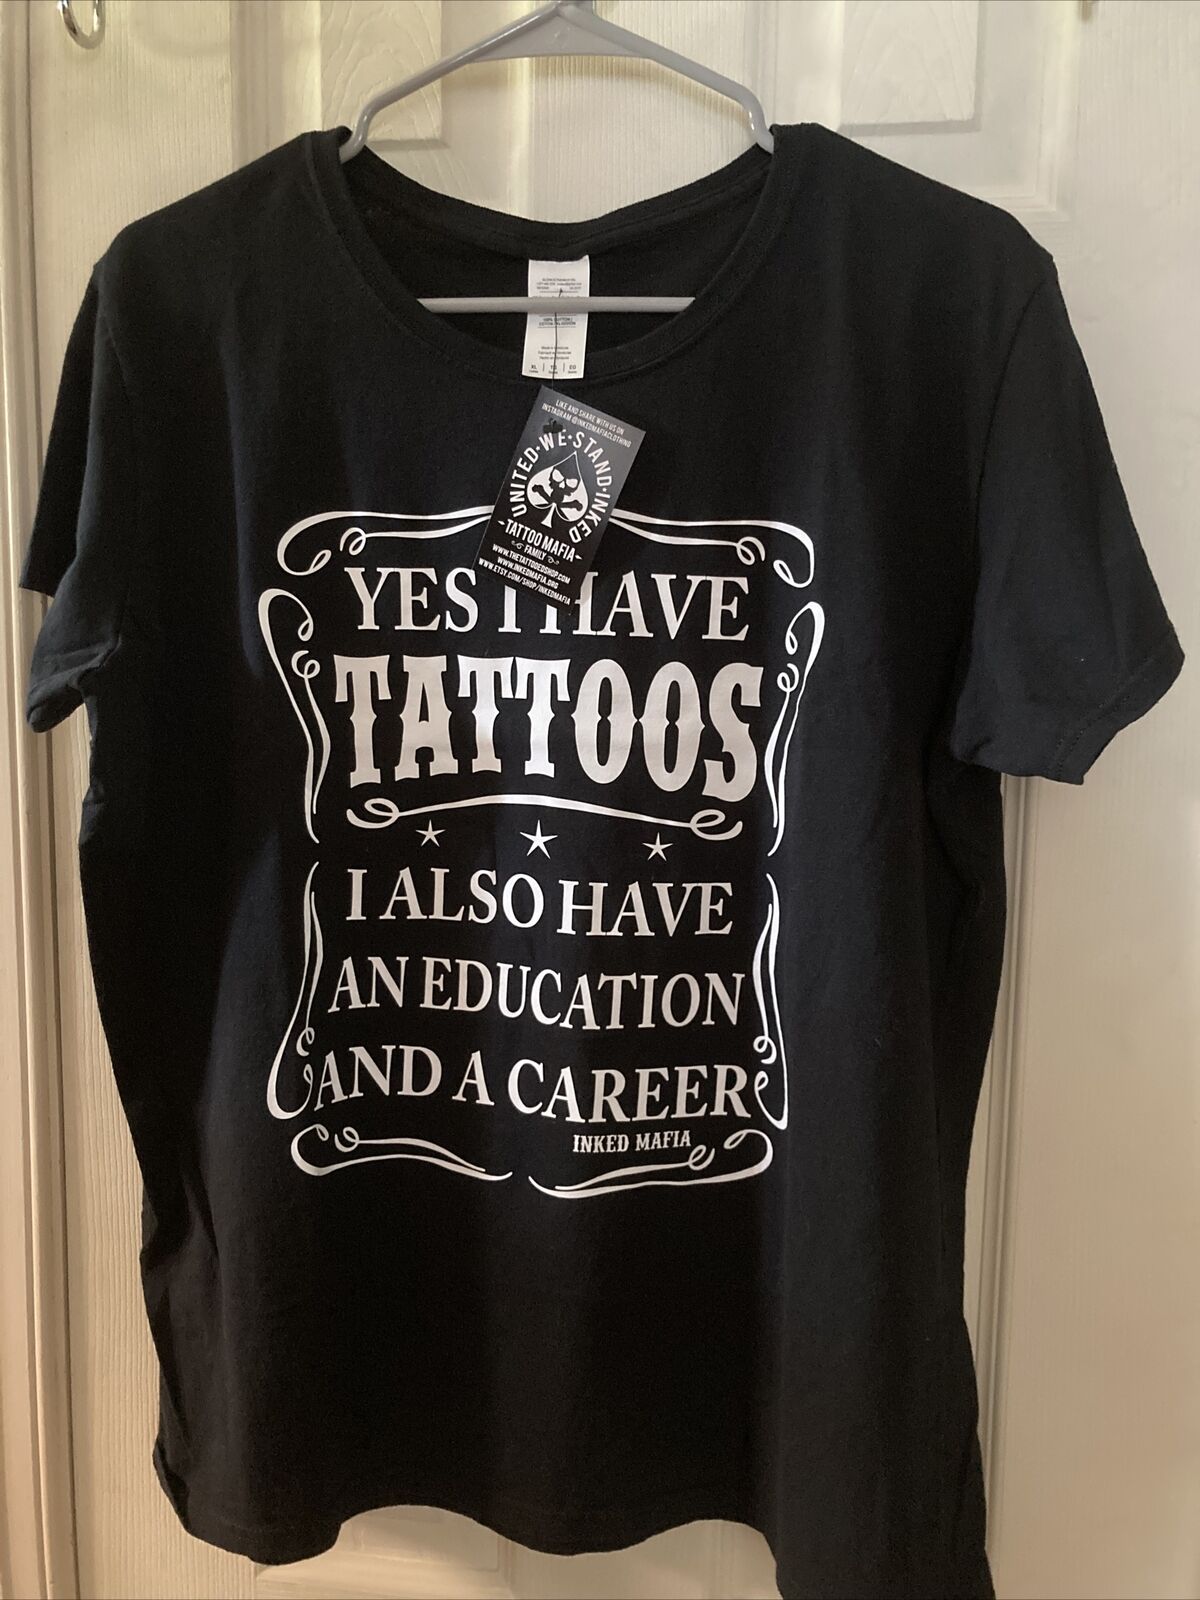 WOMENS BLACK SS T SHIRT “YES I HAVE TATTOOS, (also an education/career)” SZ  XL | eBay